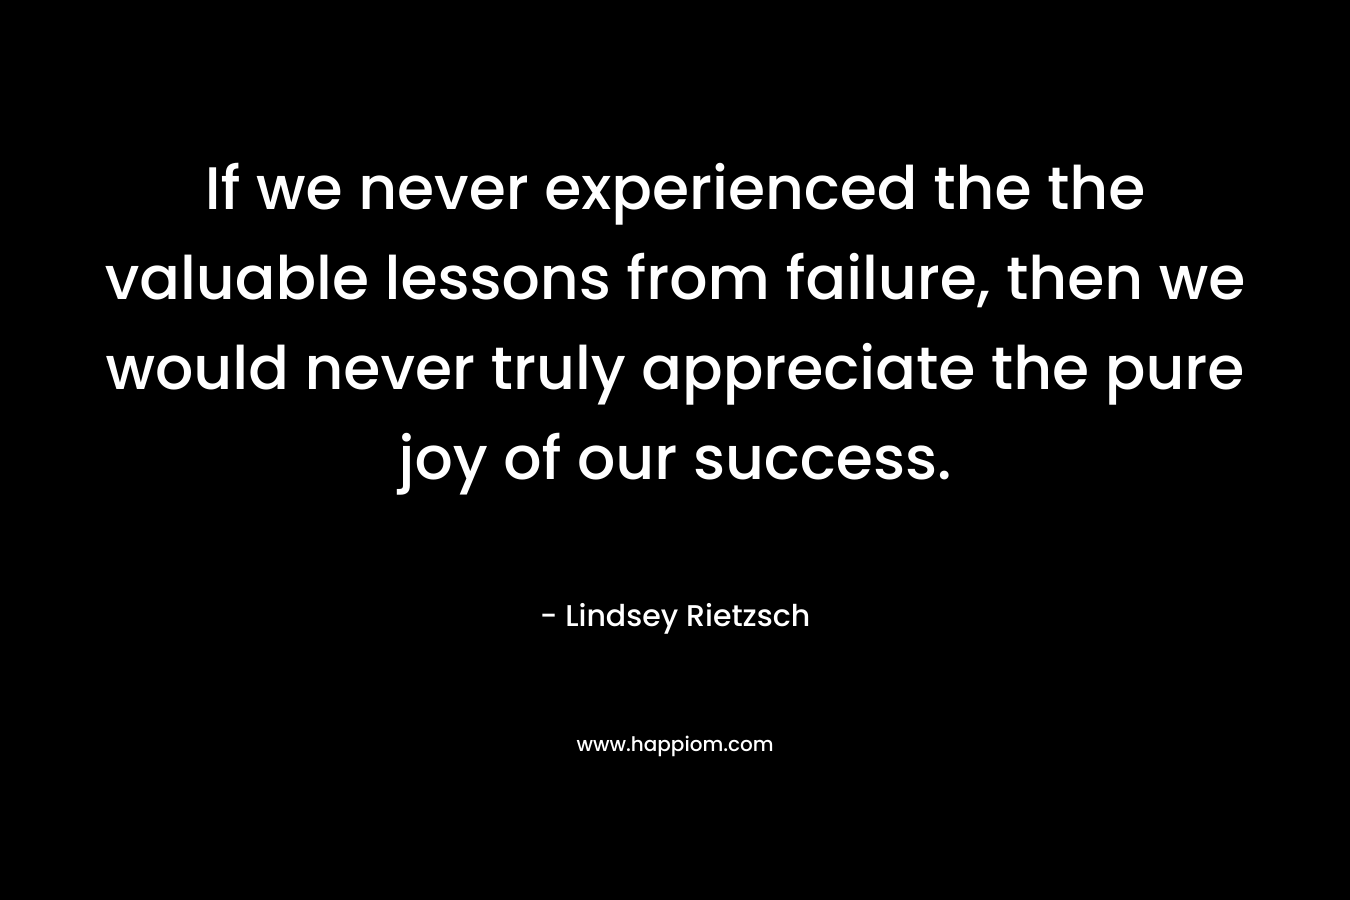 If we never experienced the the valuable lessons from failure, then we would never truly appreciate the pure joy of our success.